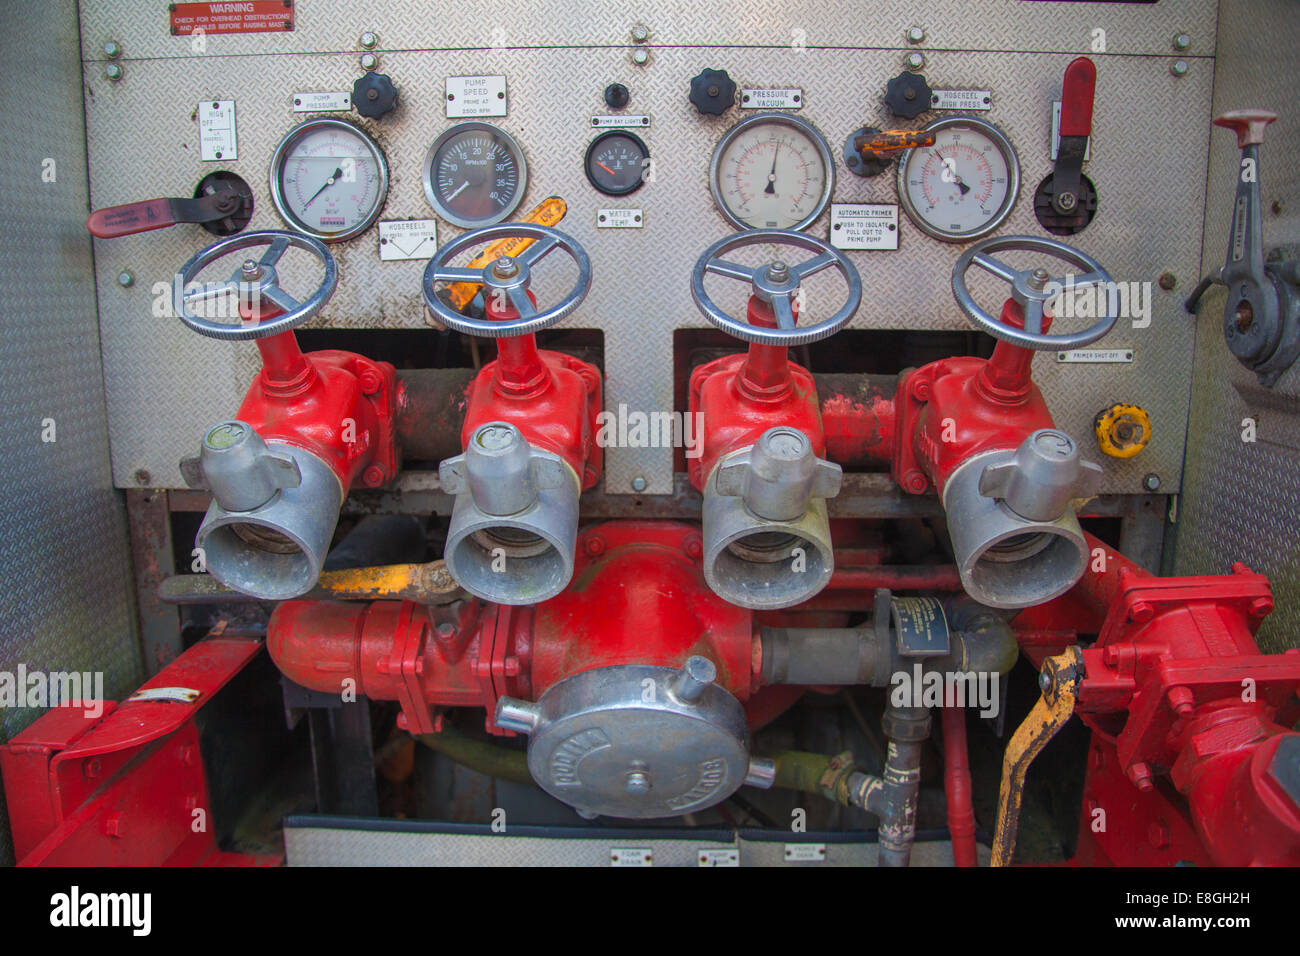 Scrapped fire engine pump valves and gauges Stock Photo